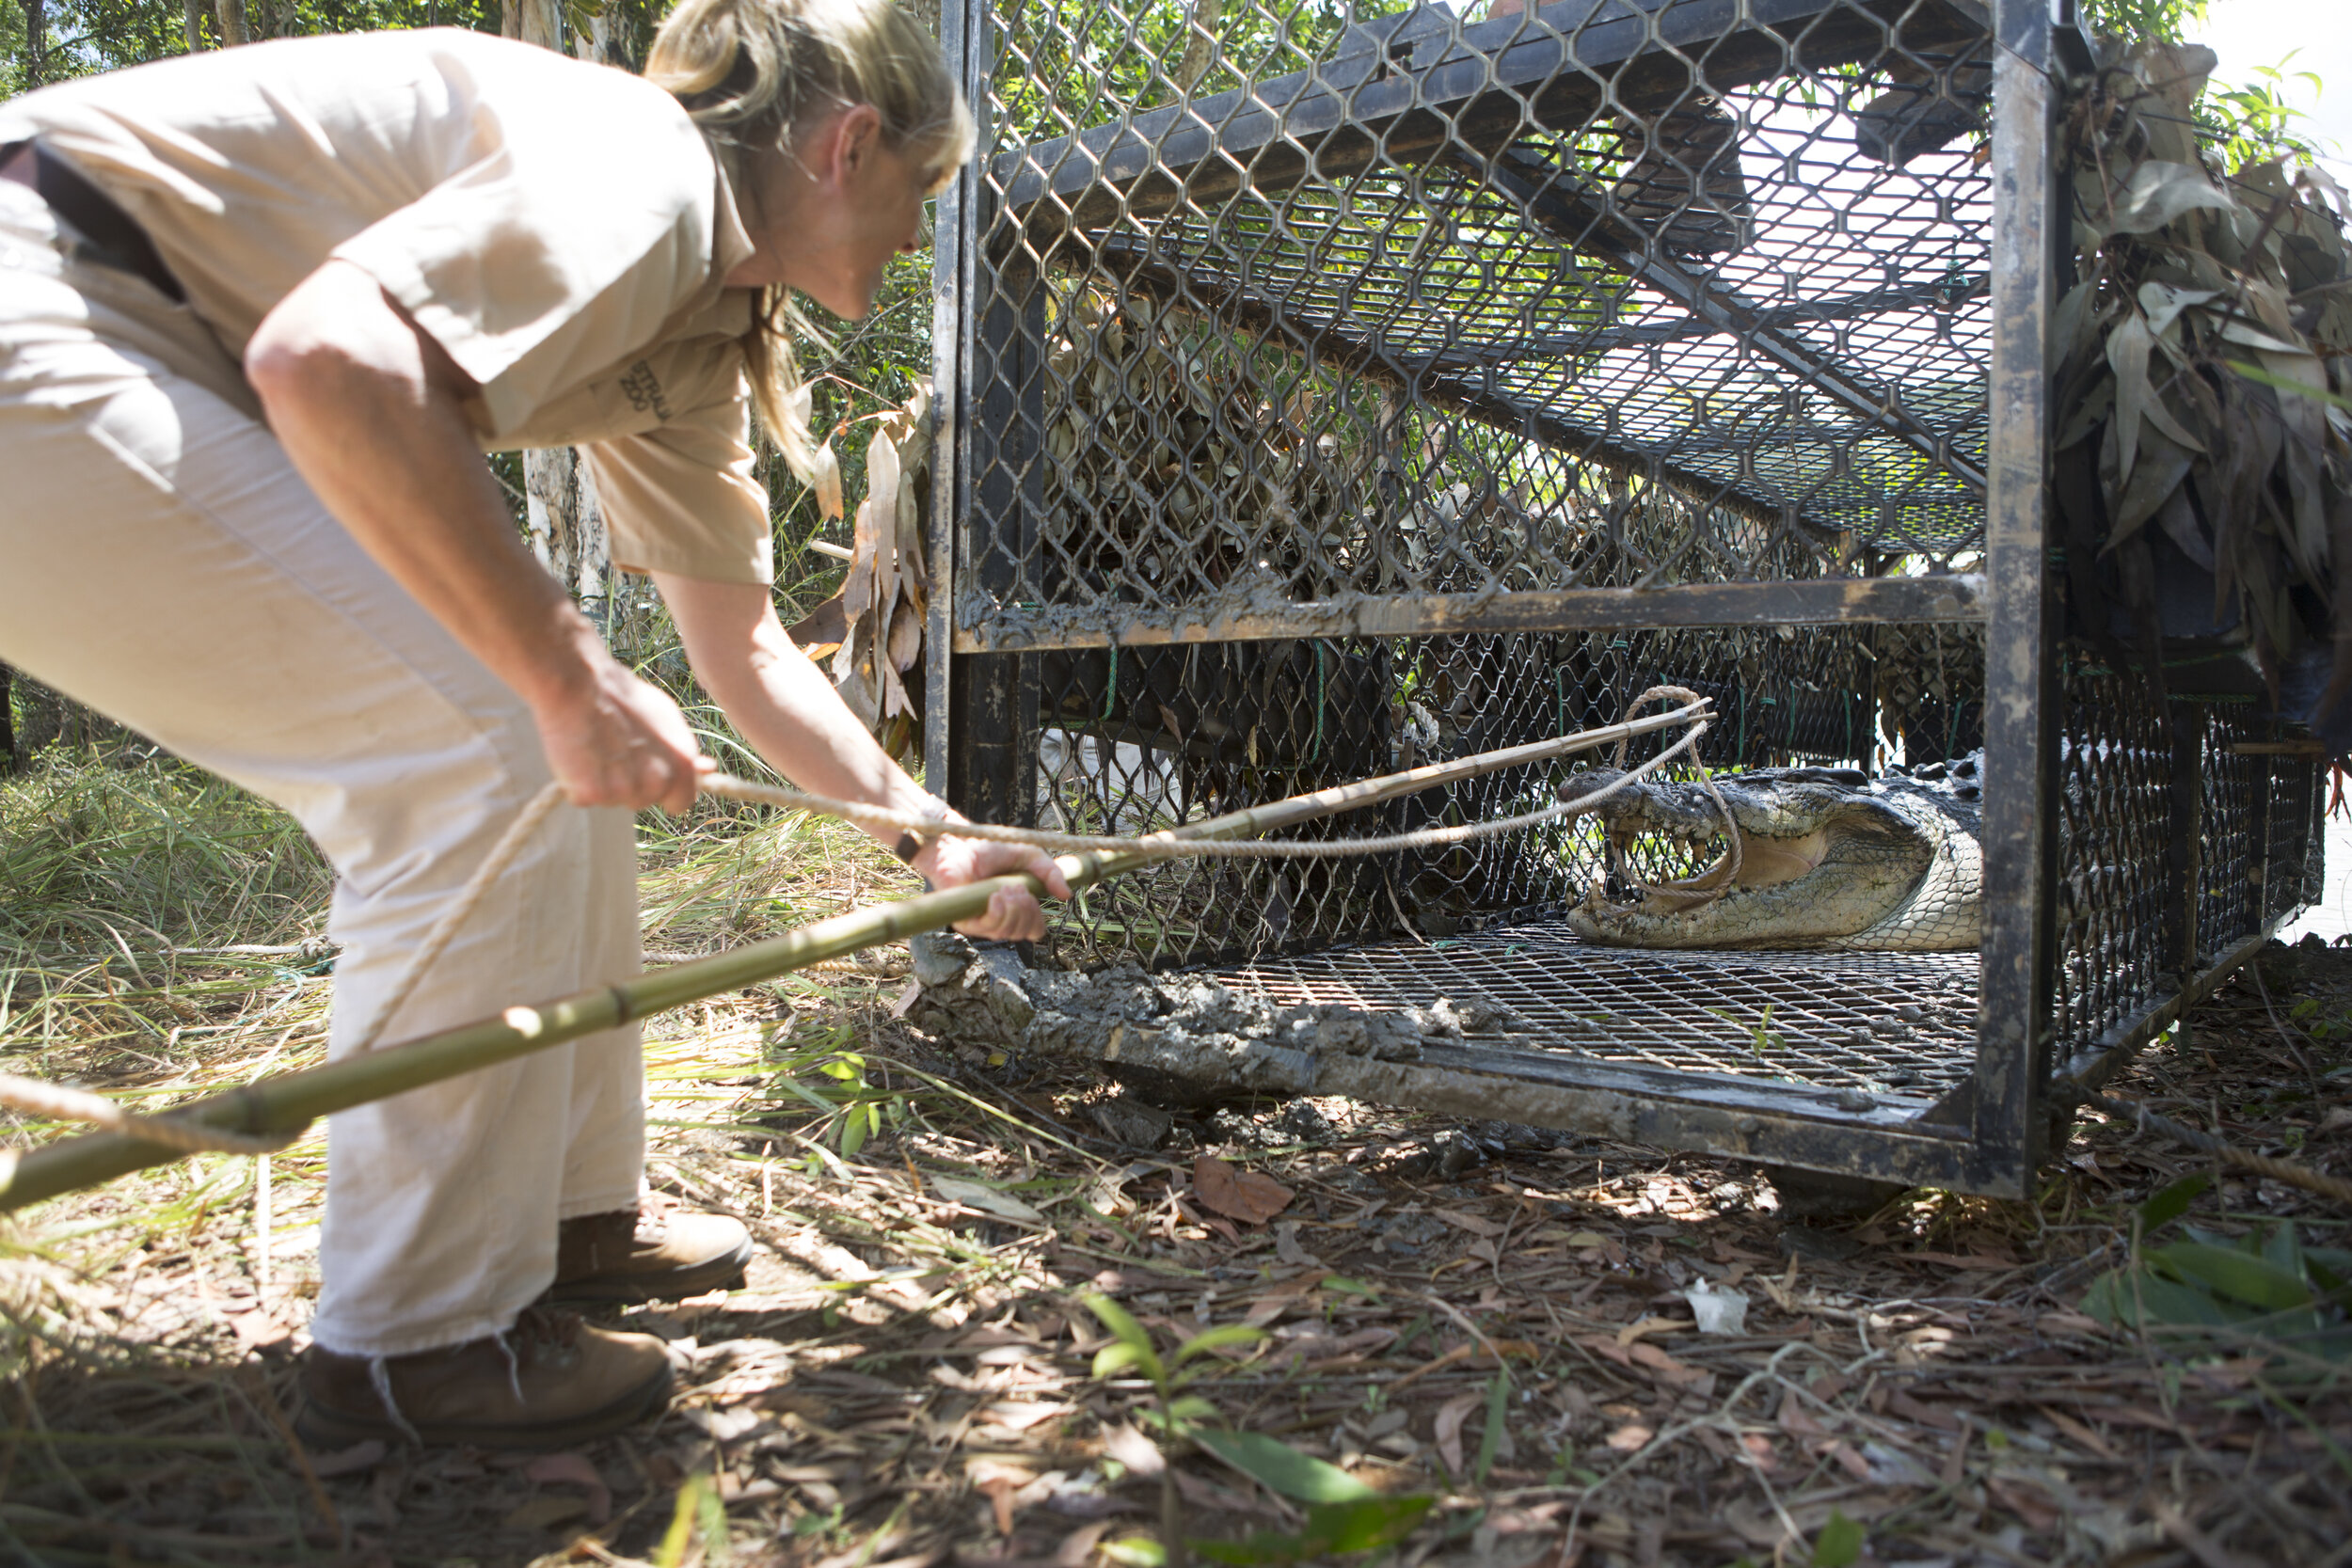  The Capture and release of Jurgen the Crocodile, who was originally captured in 2012 